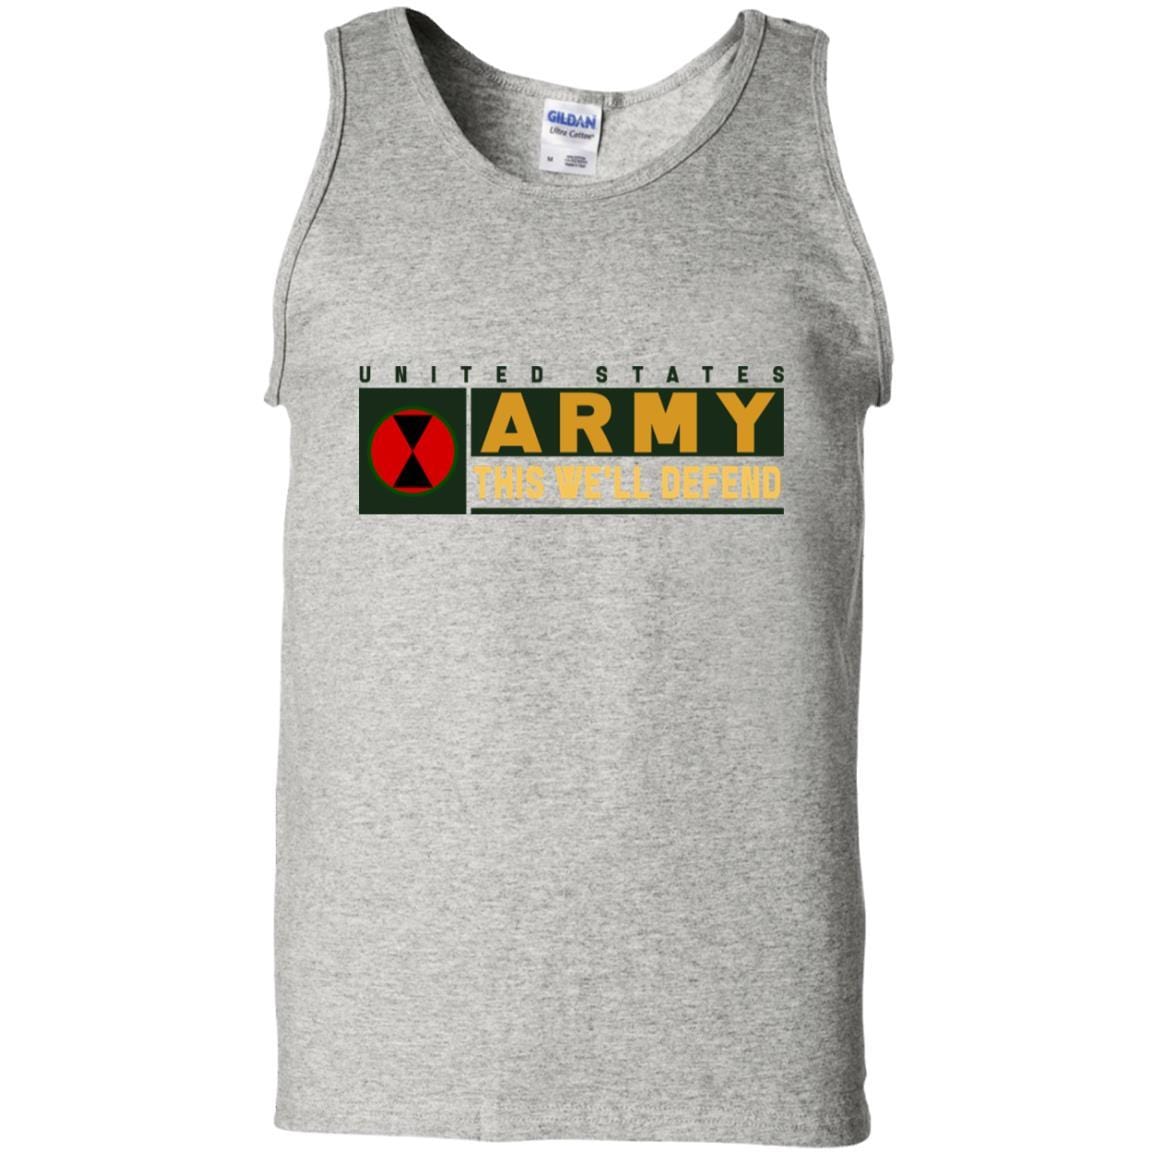 US Army 7th Infantry Division- This We'll Defend T-Shirt On Front For Men-TShirt-Army-Veterans Nation